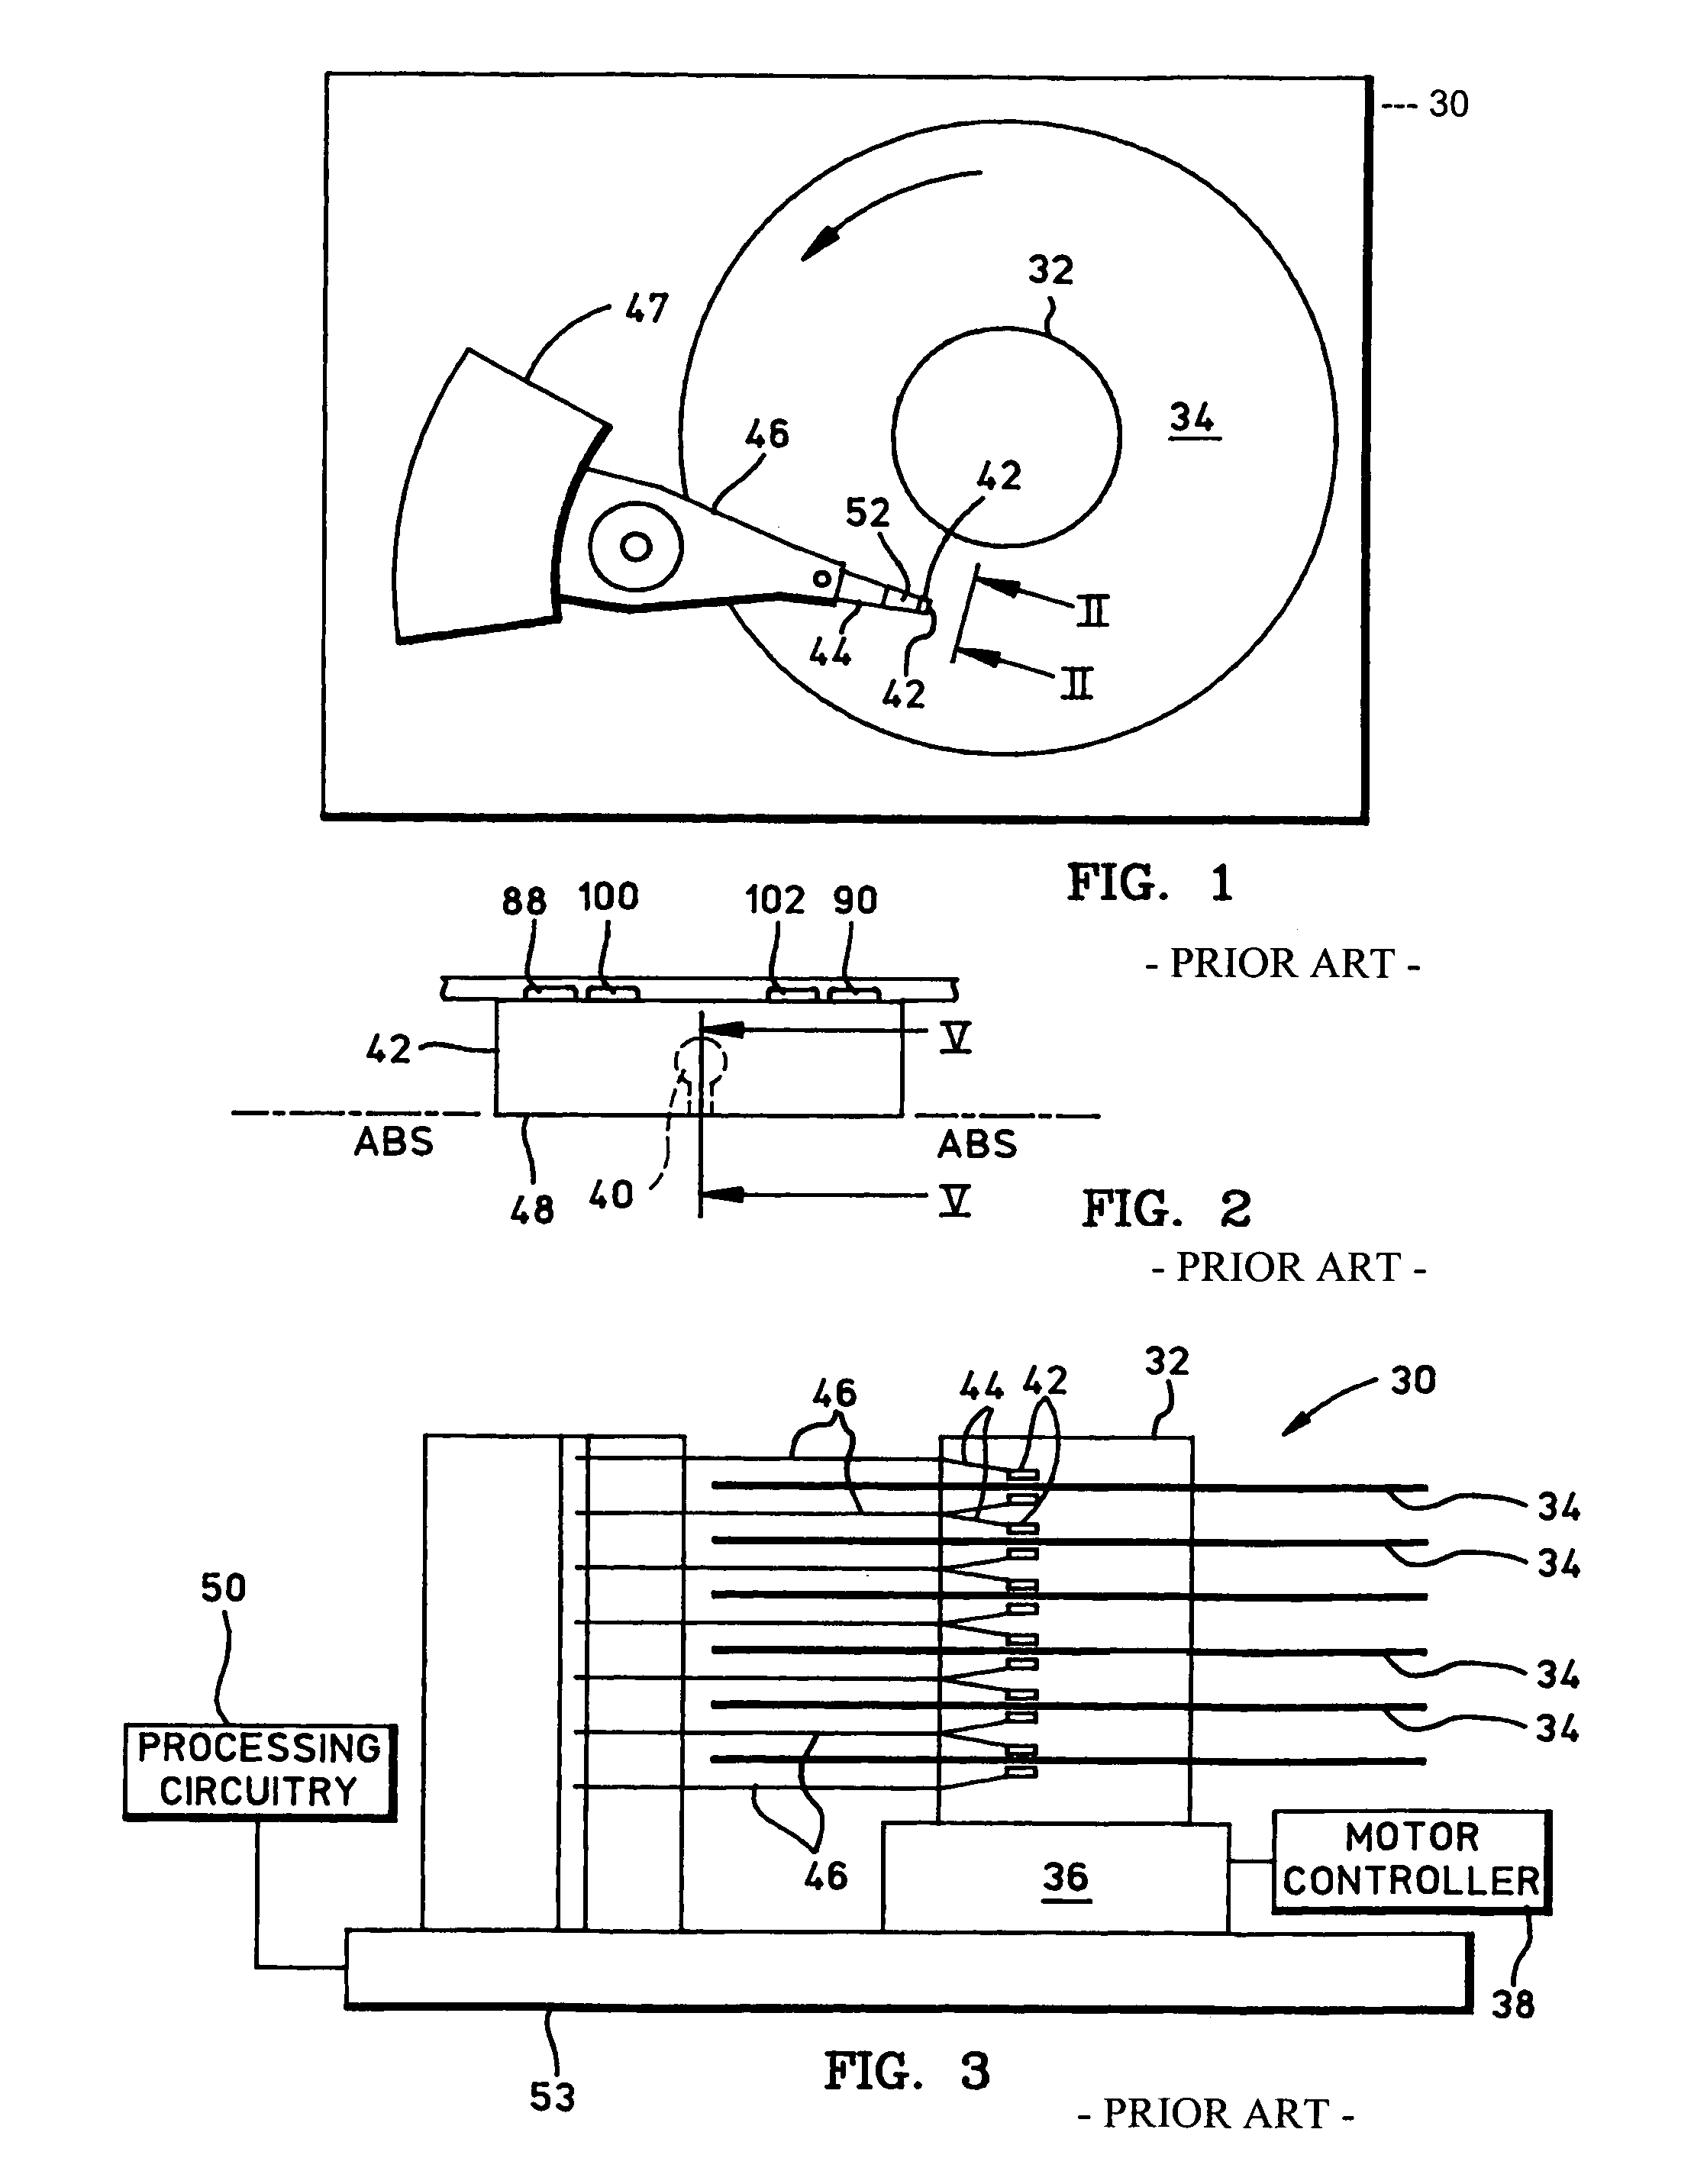 Methods of forming an electrical connection in a magnetic head using a damascene process